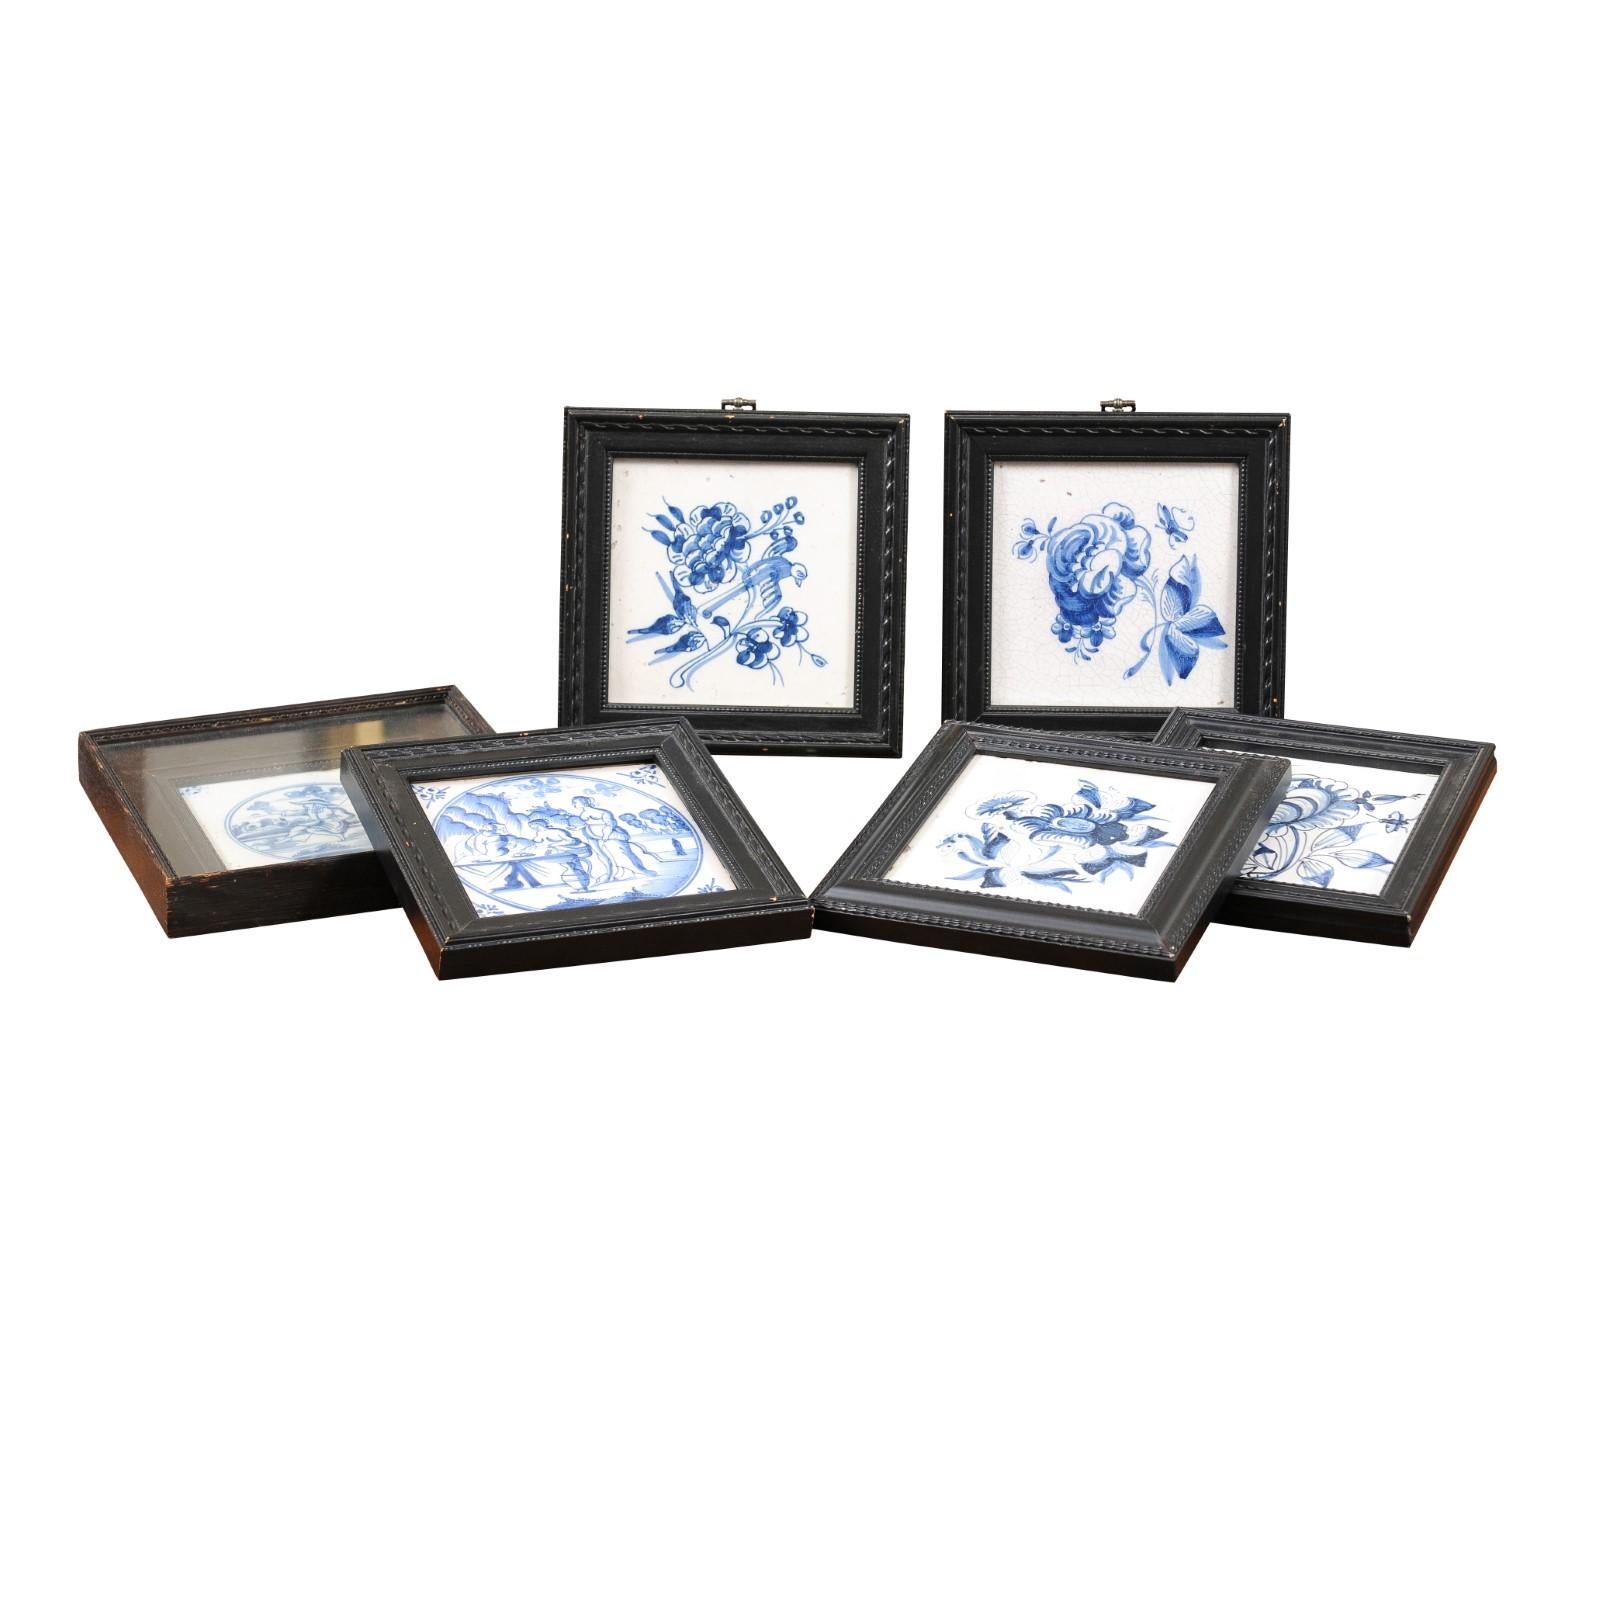  Set of 6 Assorted 18th Century Blue & White Delft Tiles in Black Frames For Sale 6